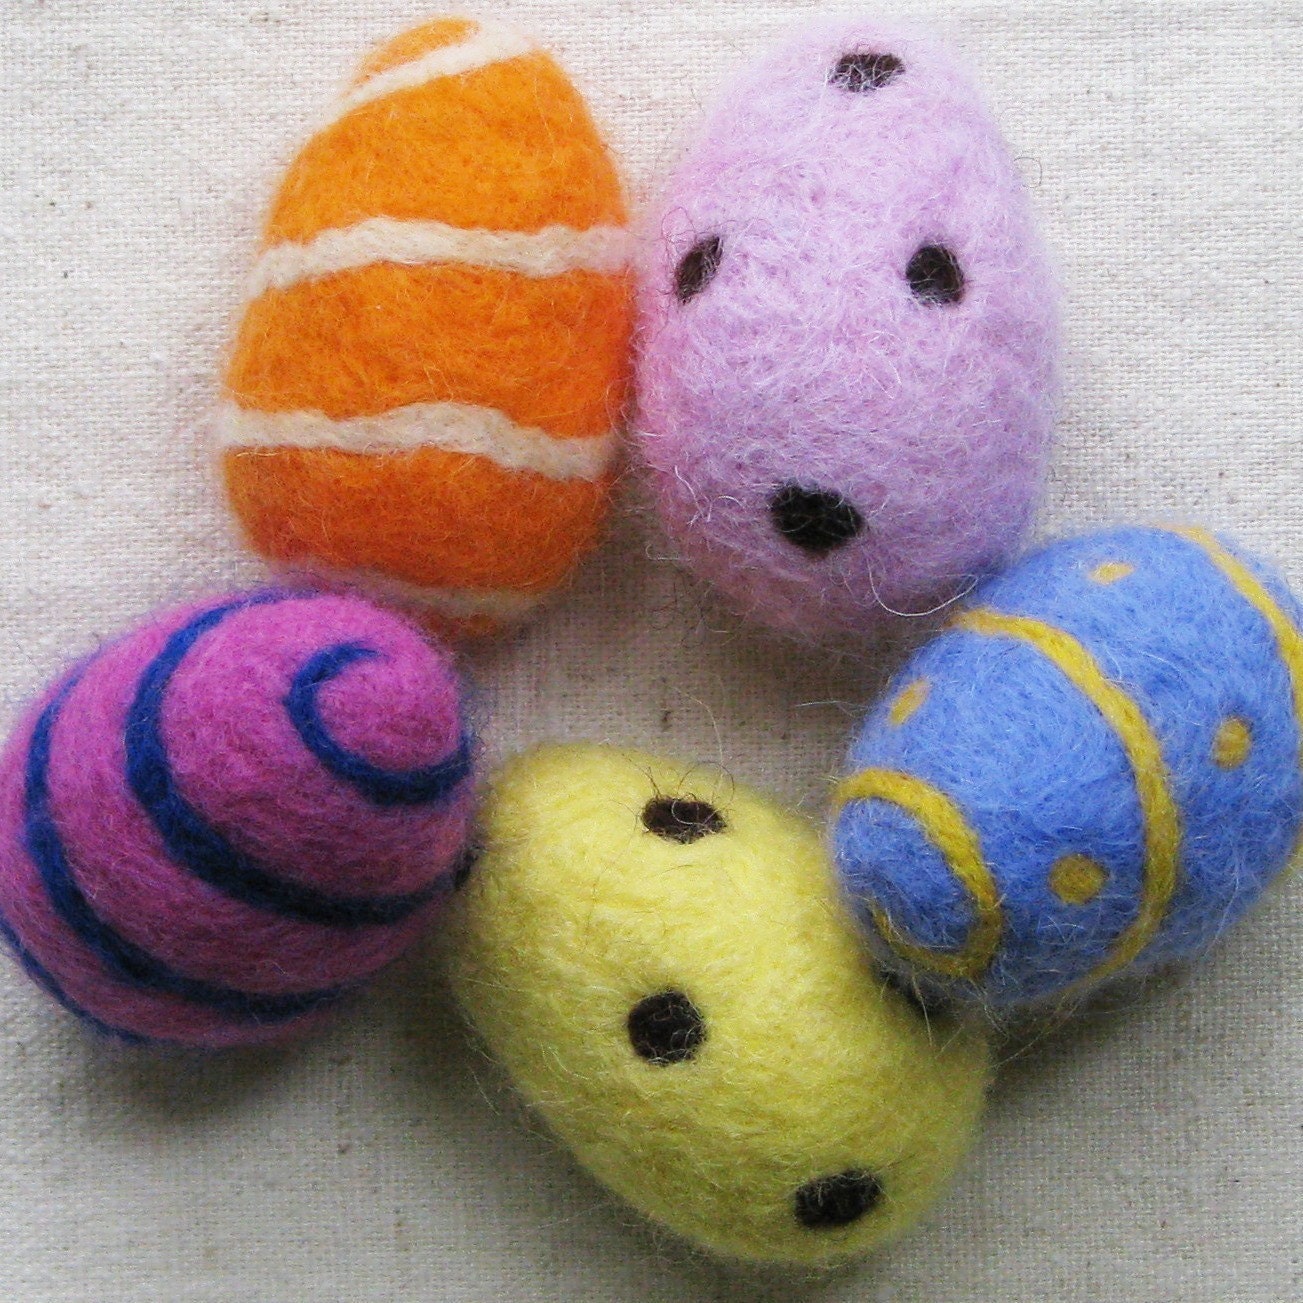 EASTER EGG, needle felted from wool in fuchsia pink with cobalt blue spiral stripe